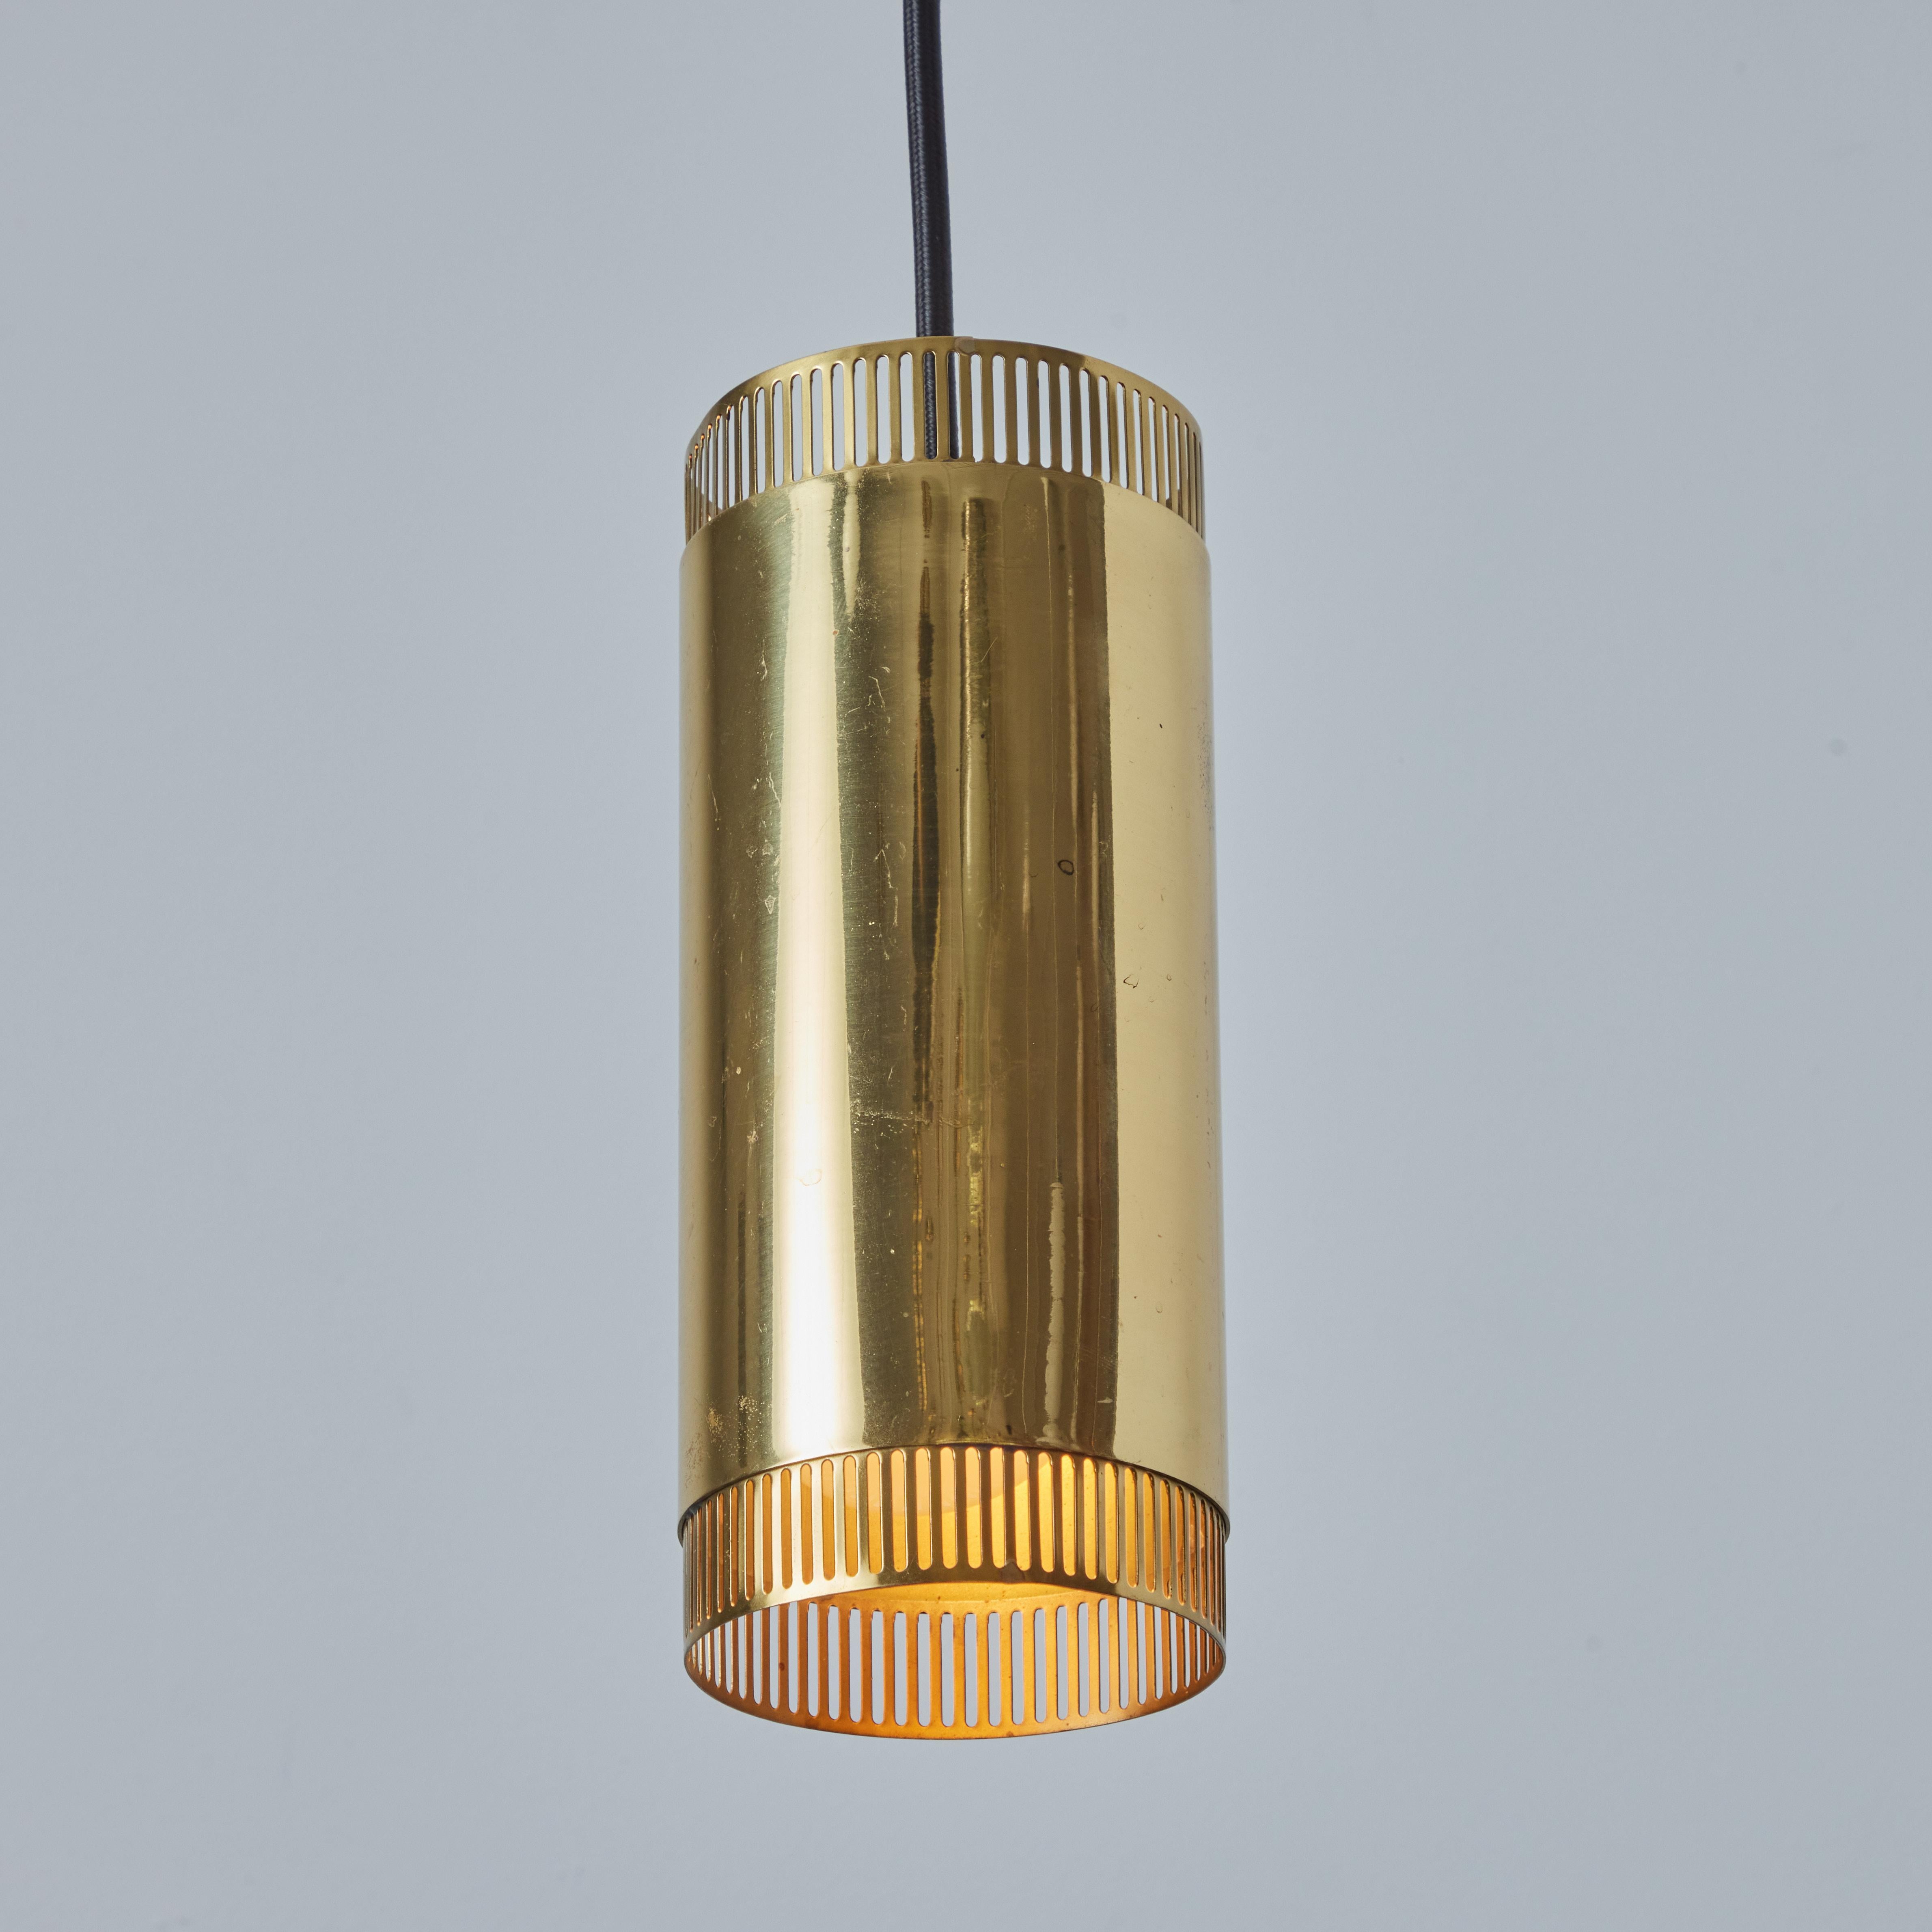 1960s Perforated Brass Cylindrical Pendant Attributed to Mauri Almari for Idman For Sale 3